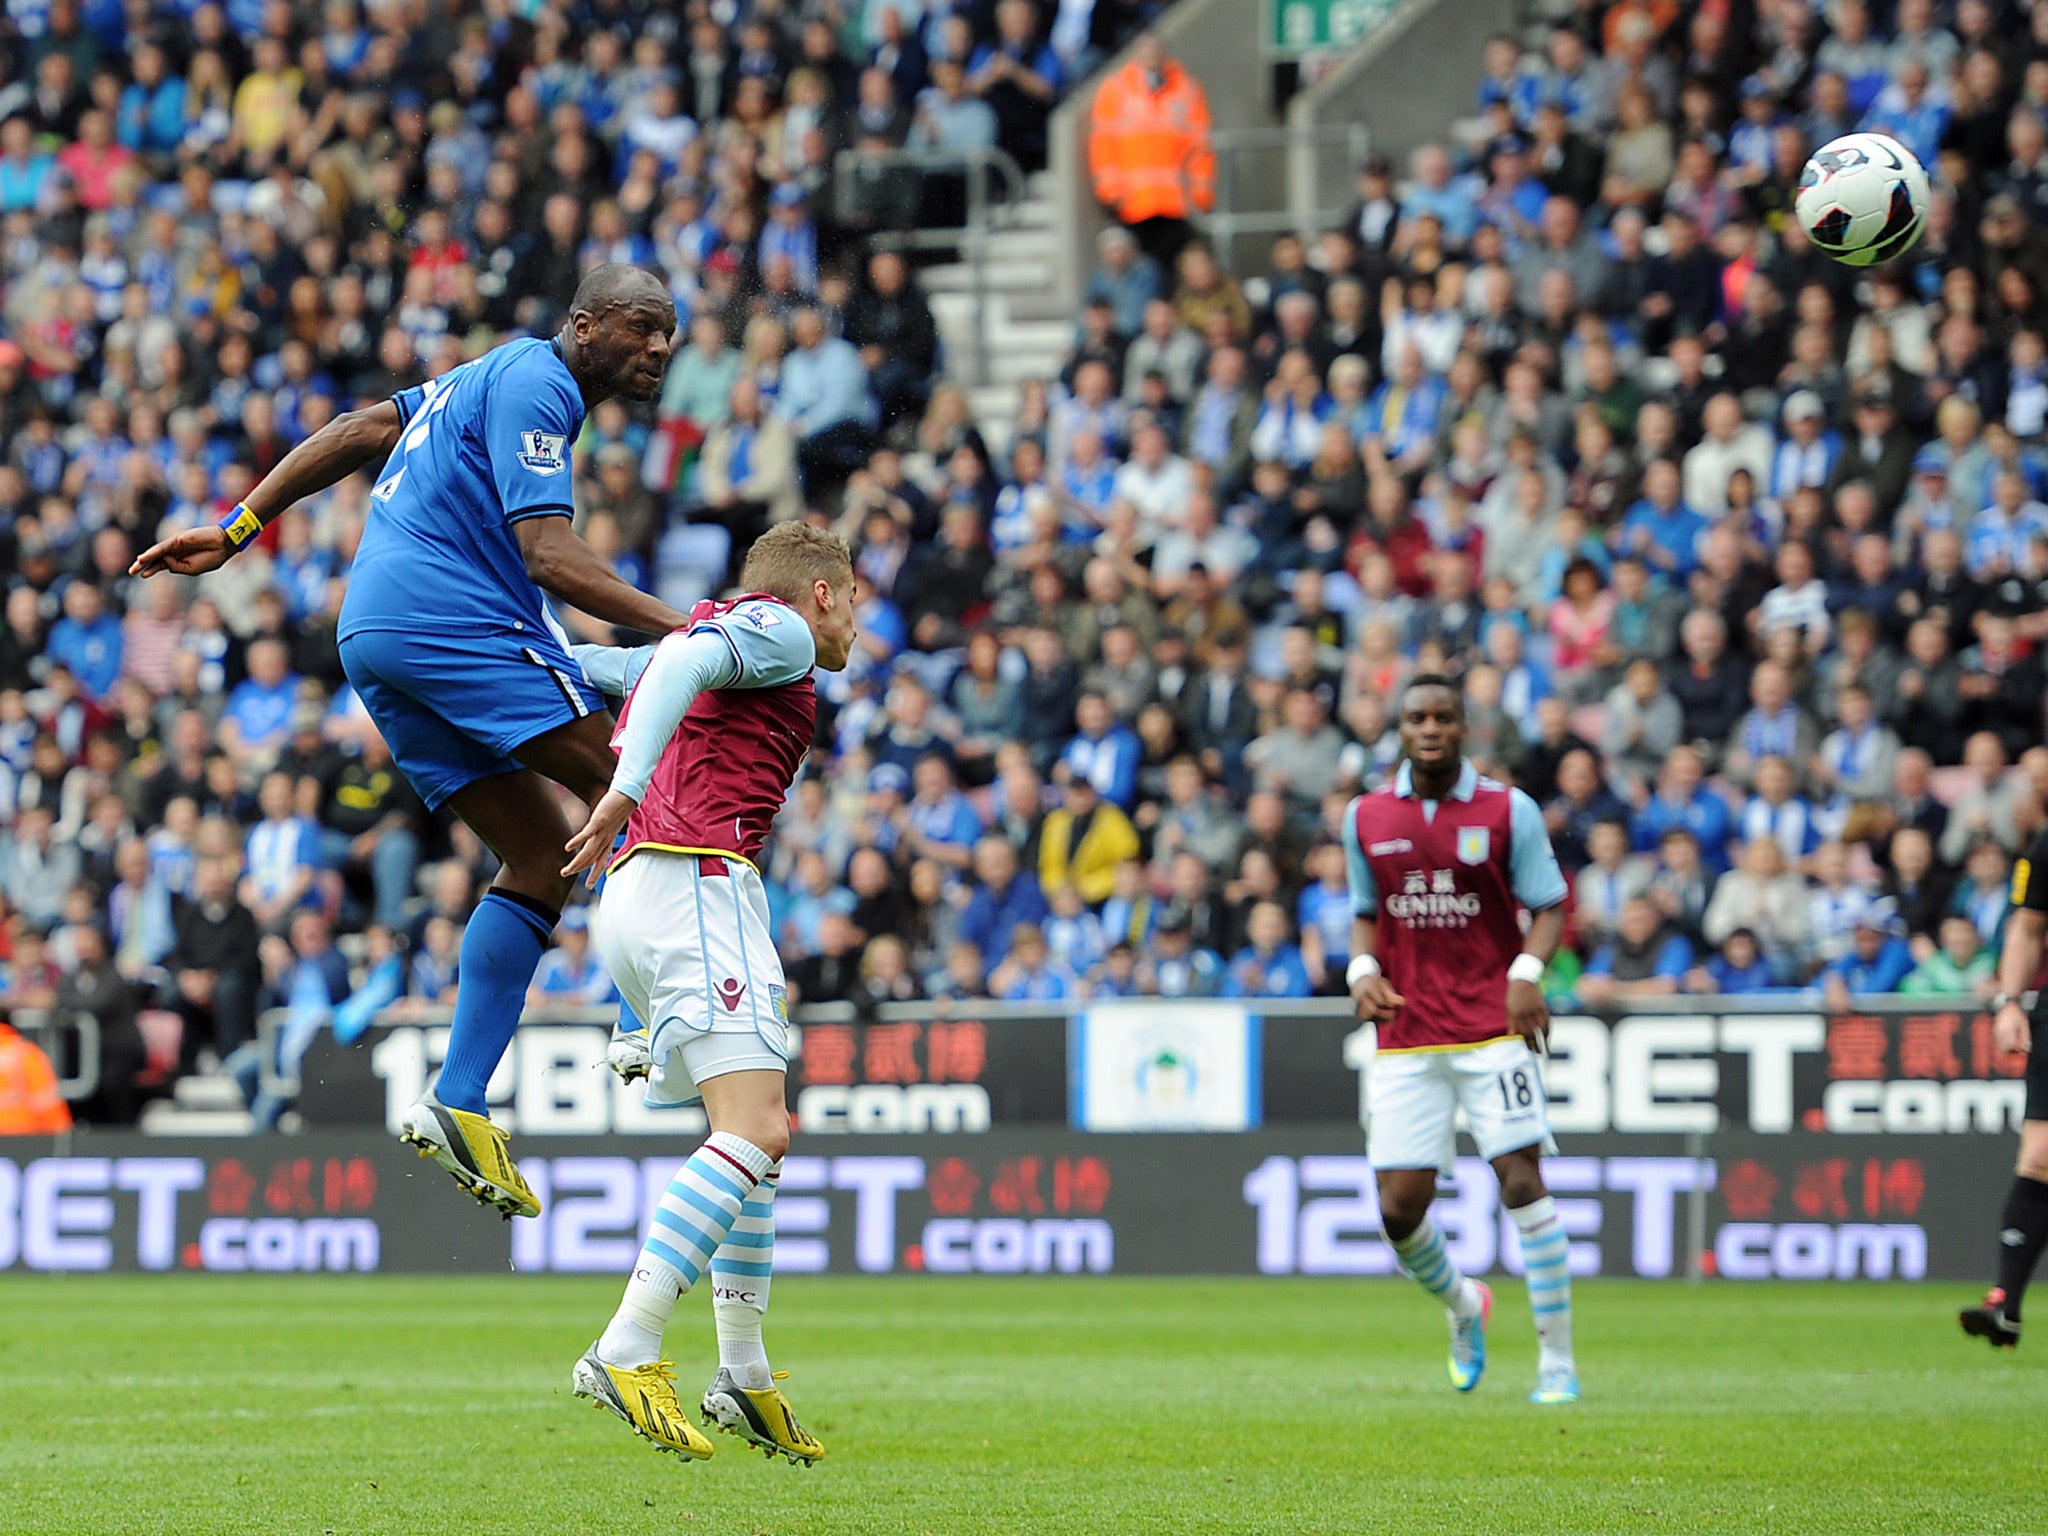 Emmerson Boyce of Wigan Athletic heads his side's first goal during the 2-2 draw with Aston Villa